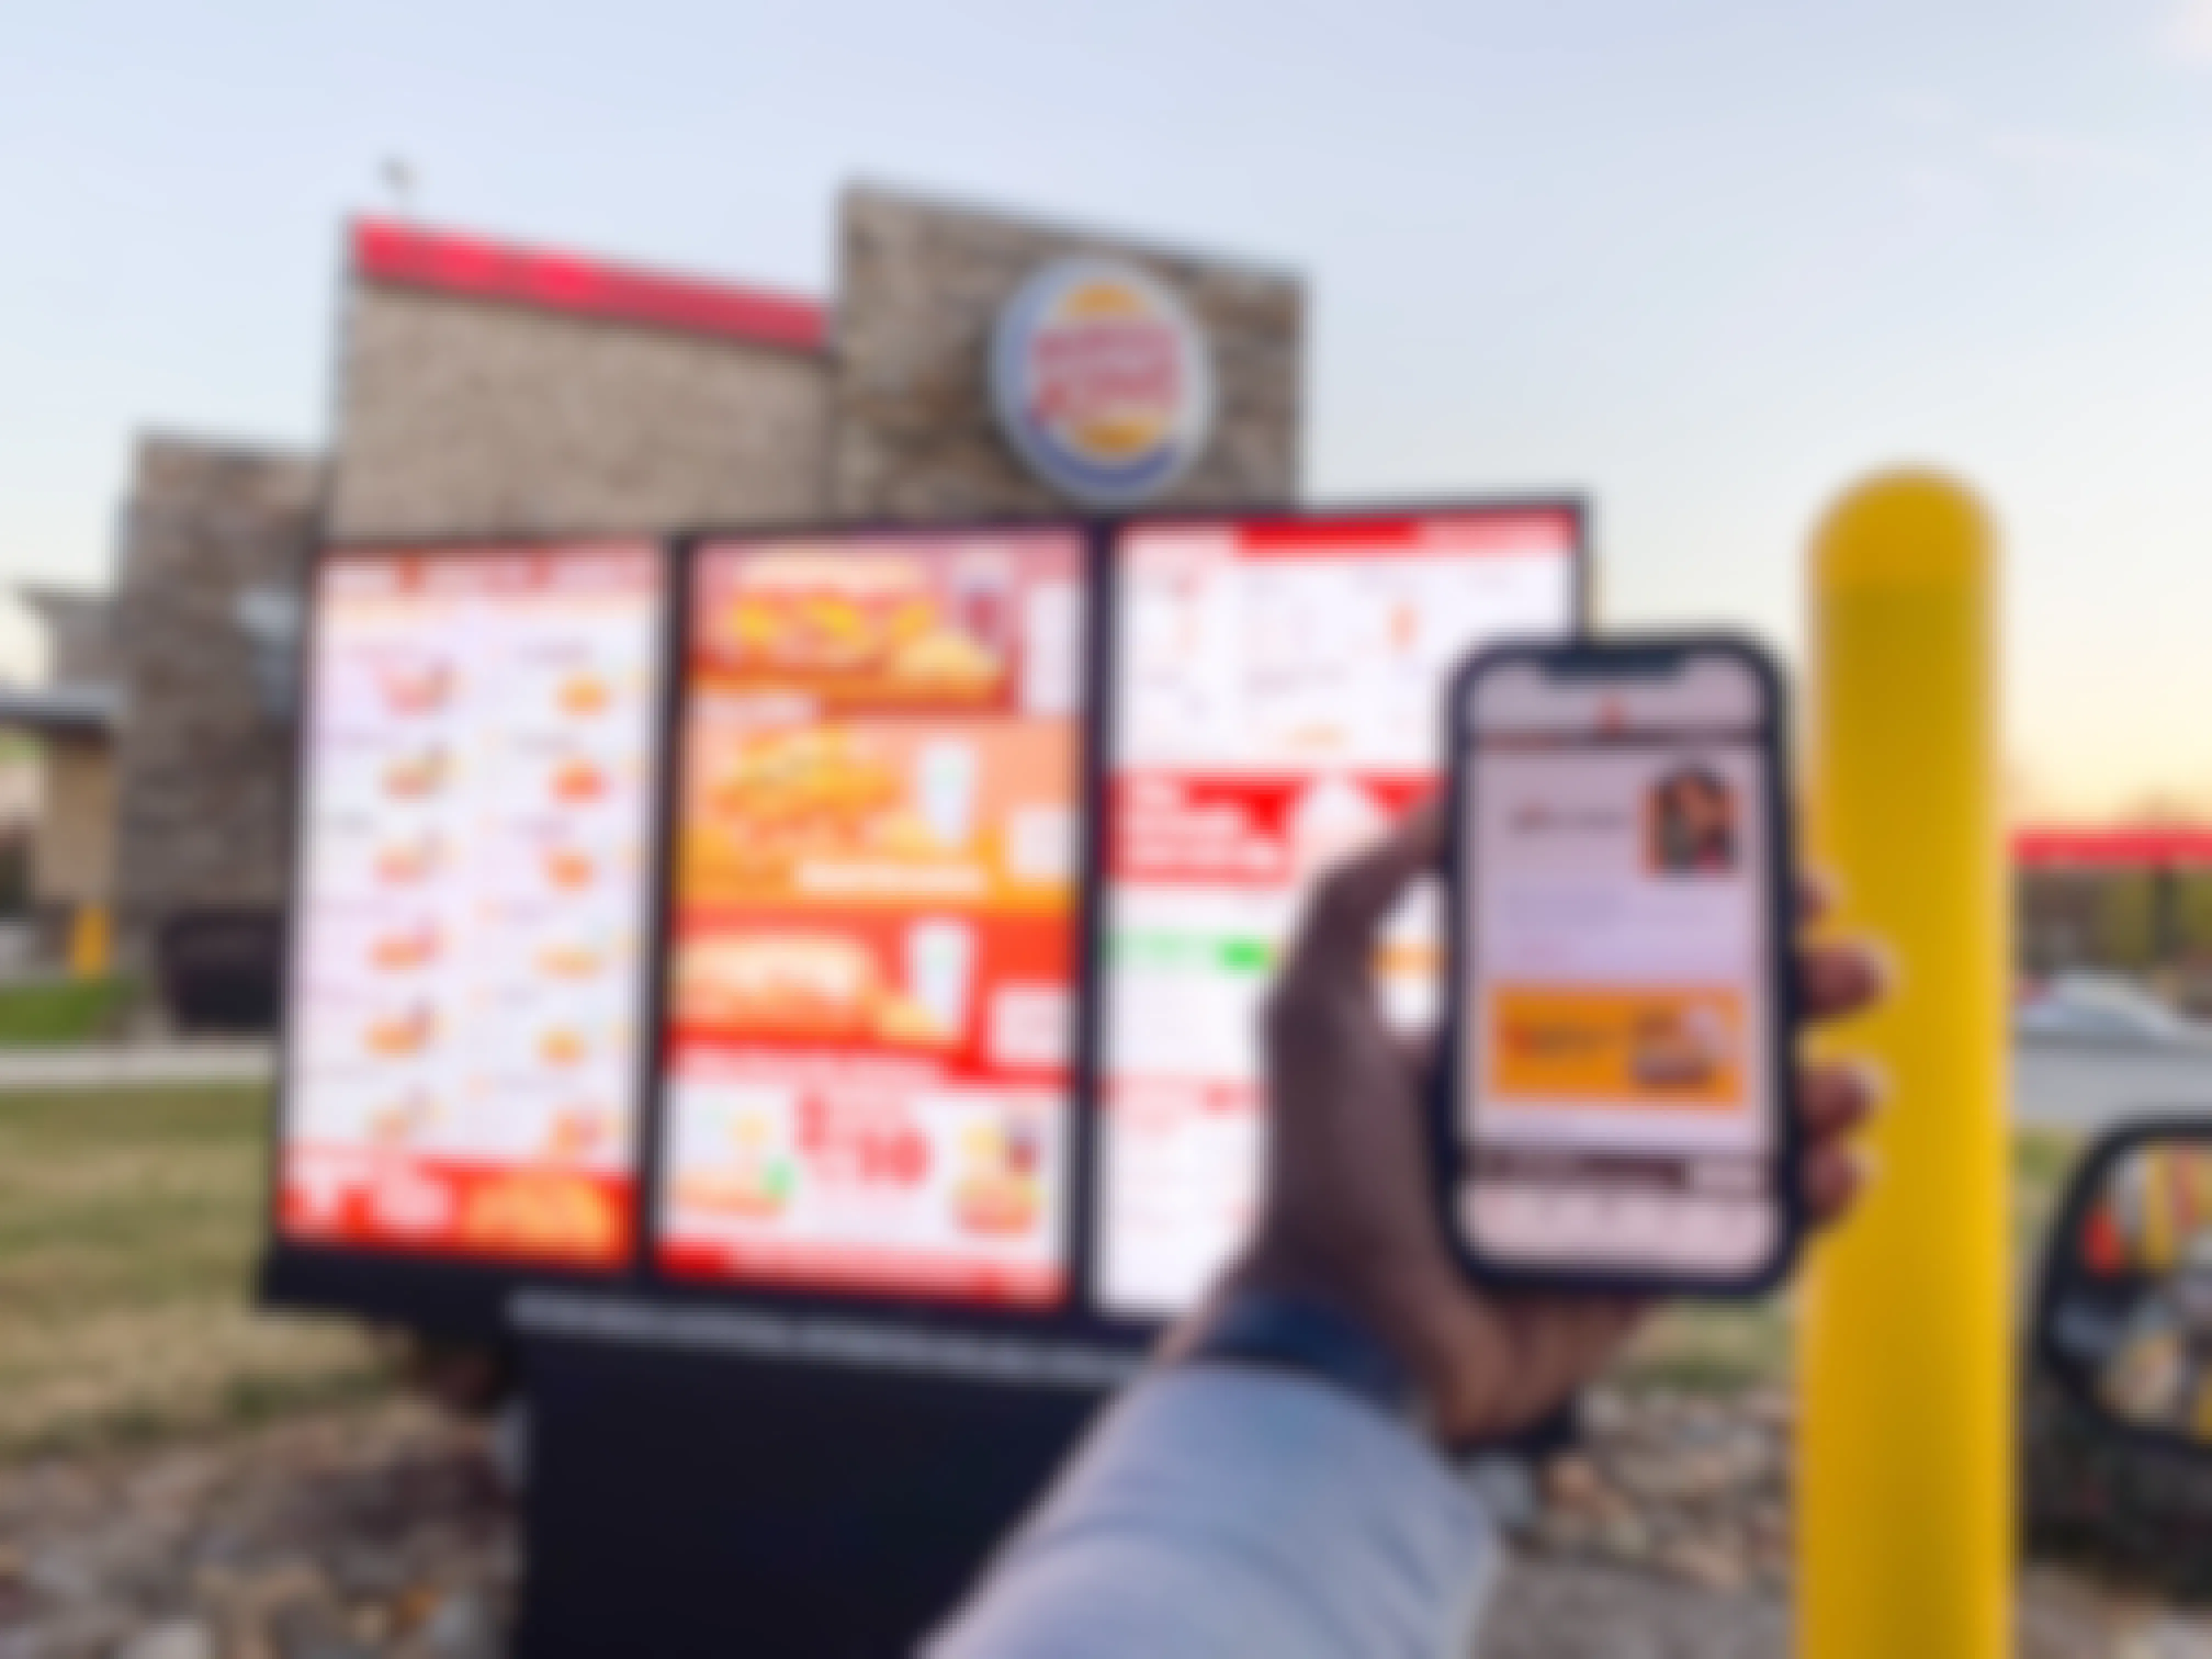 A person's hand holding up their phone displaying the Burger King Royal Perks app next to the menu in the Burger King drive thru line.